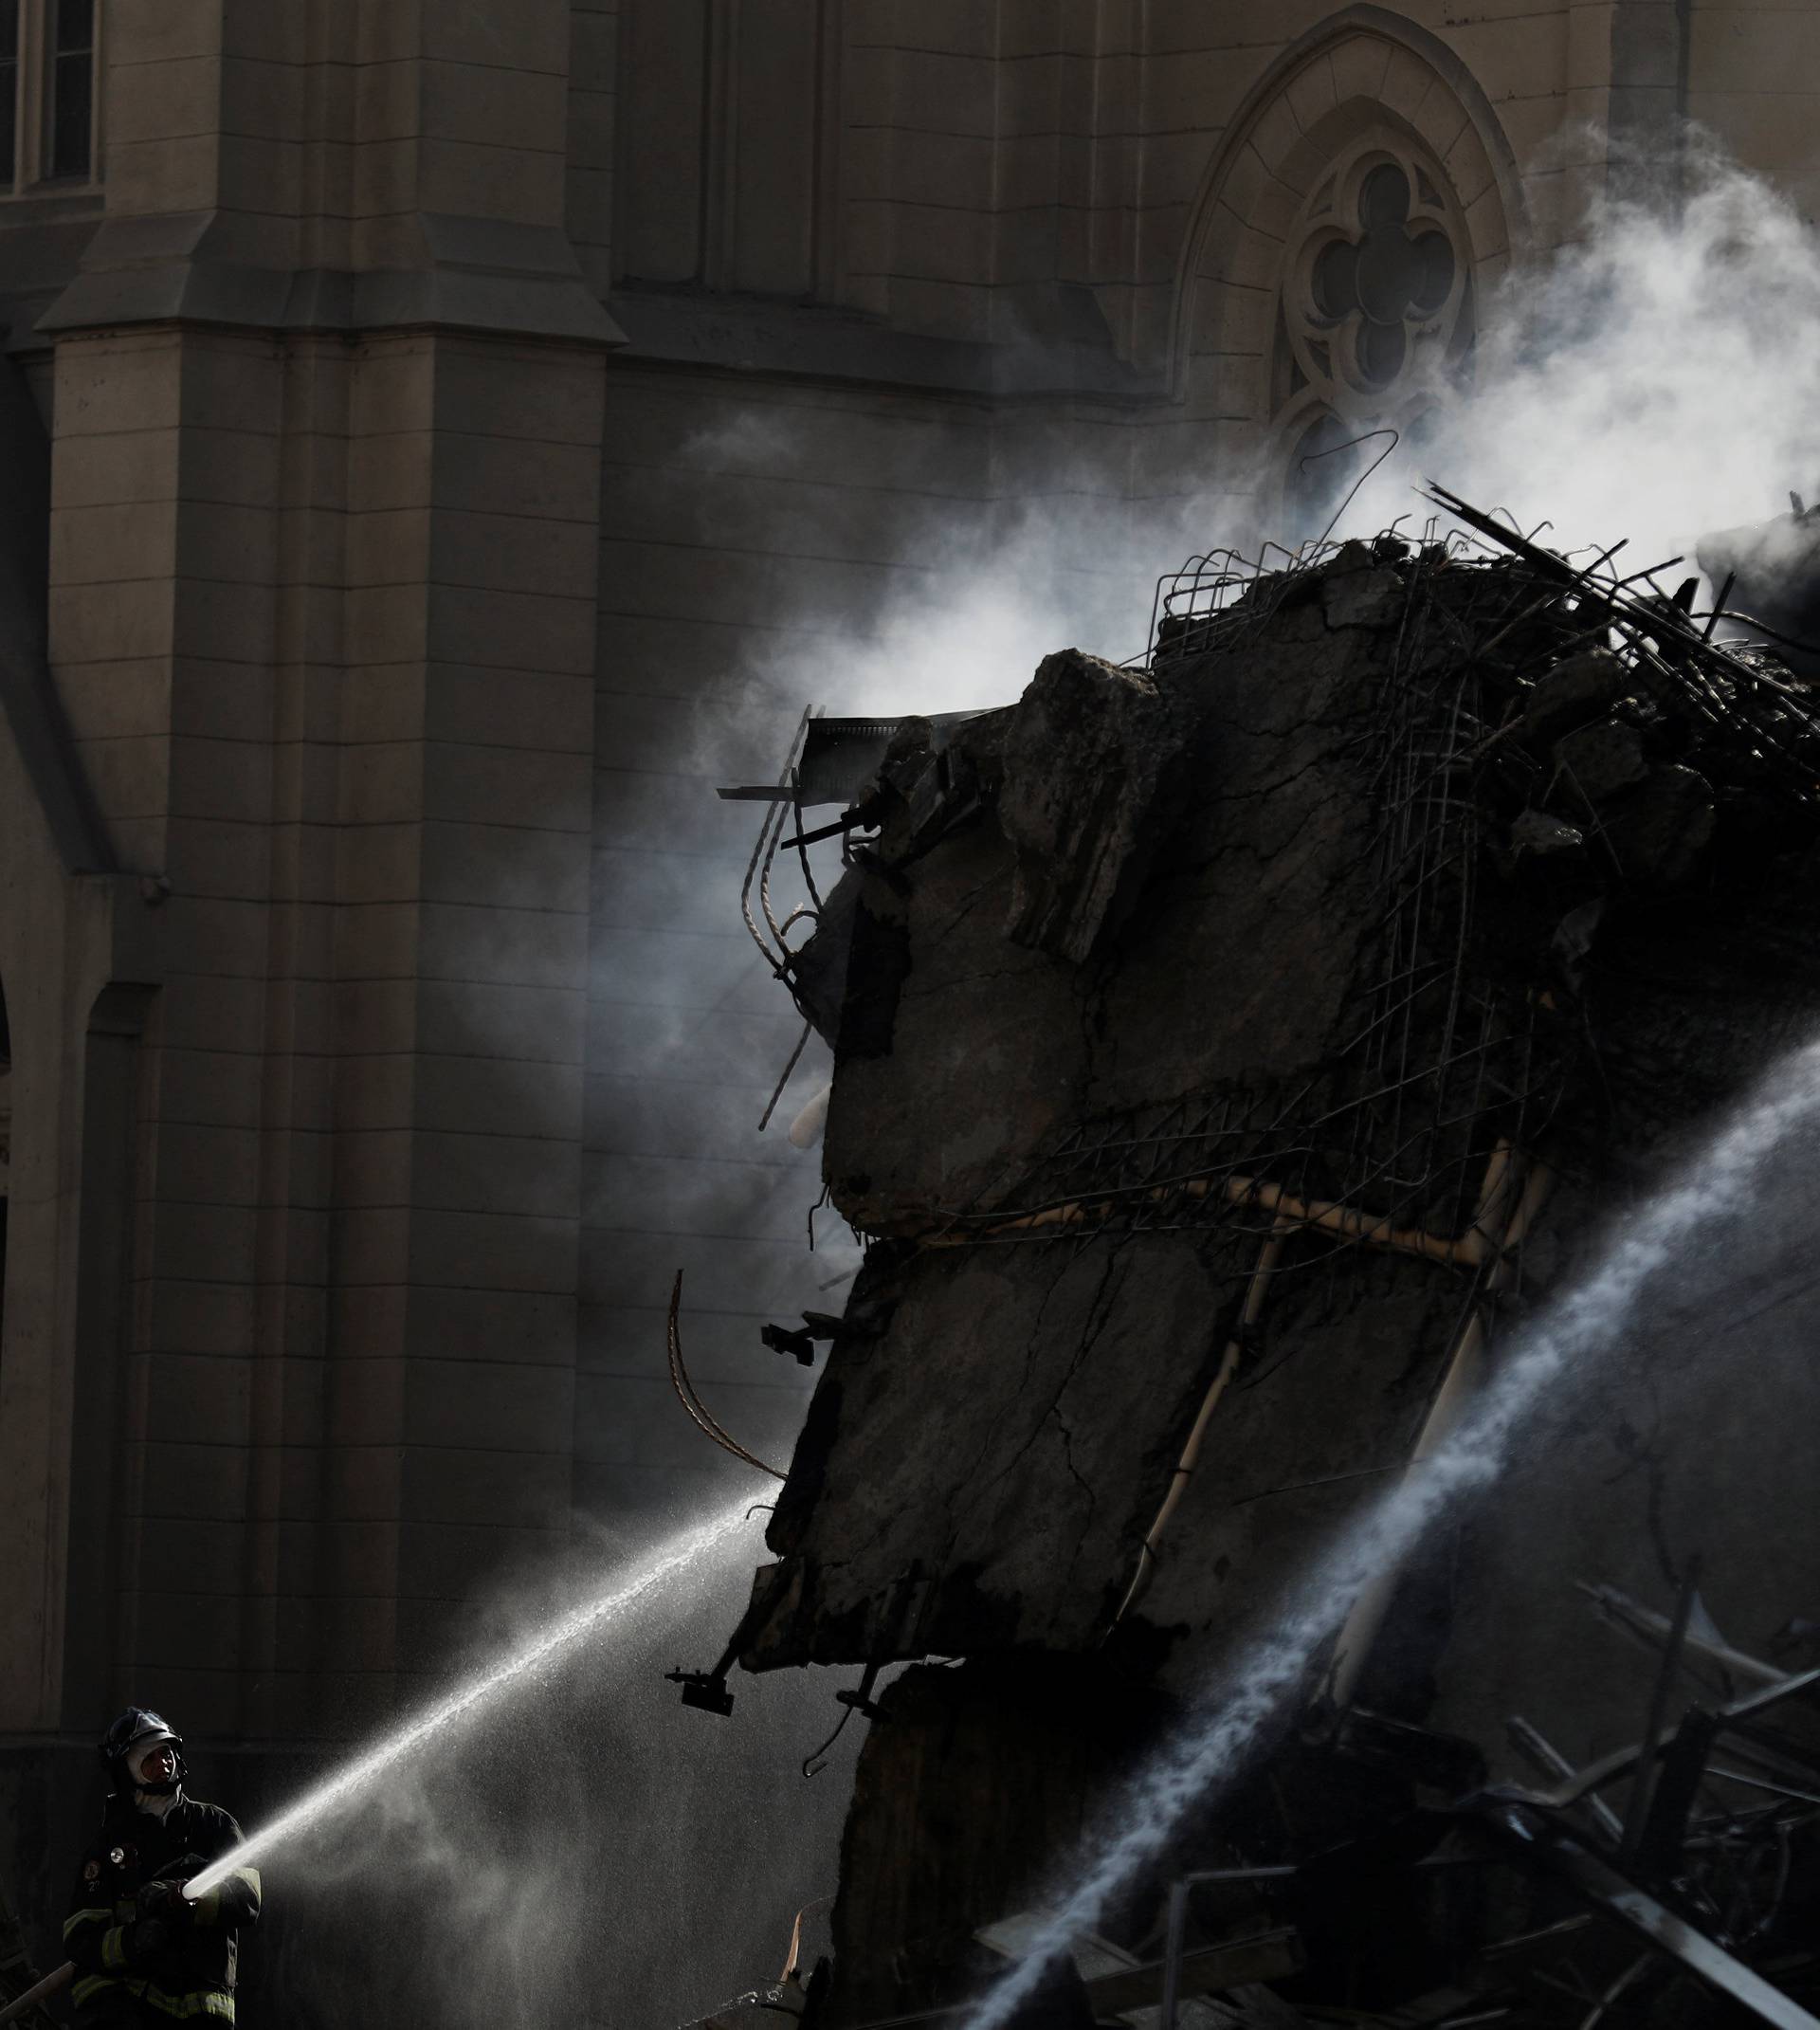 Firefighters try to extinguish the fire of a building that caught fire and collapsed in the center of Sao Paulo